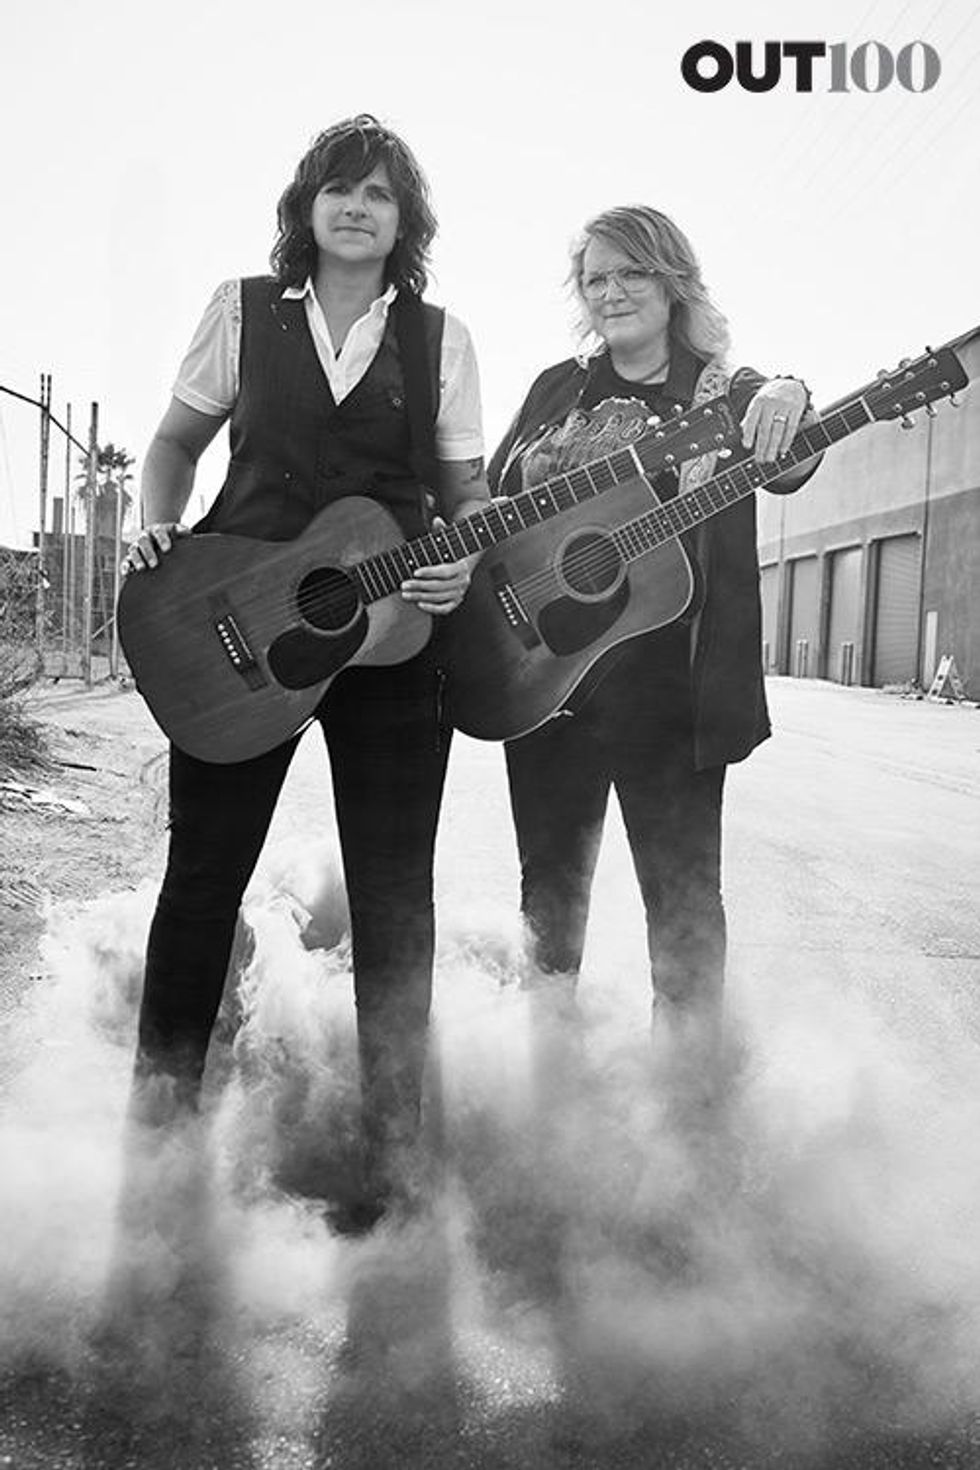 OUT100: The Indigo Girls, Singer-Songwriters